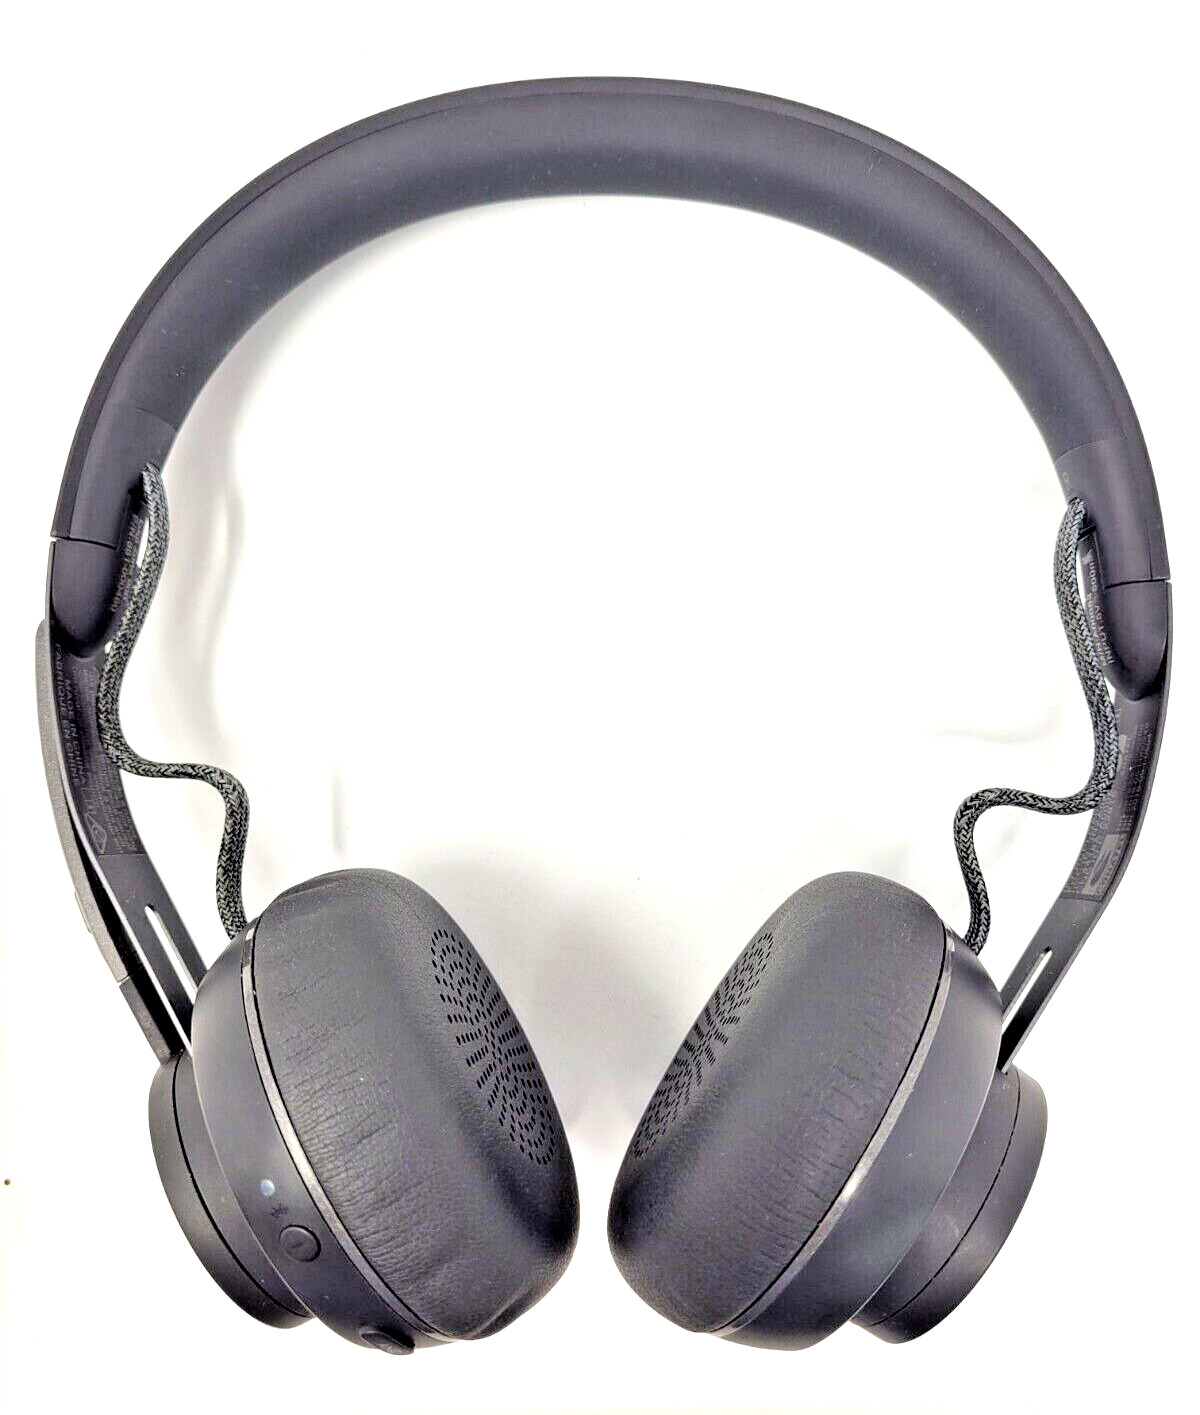 Logitech Zone 900 Wireless Headset ( Headset Only, No accessories included)